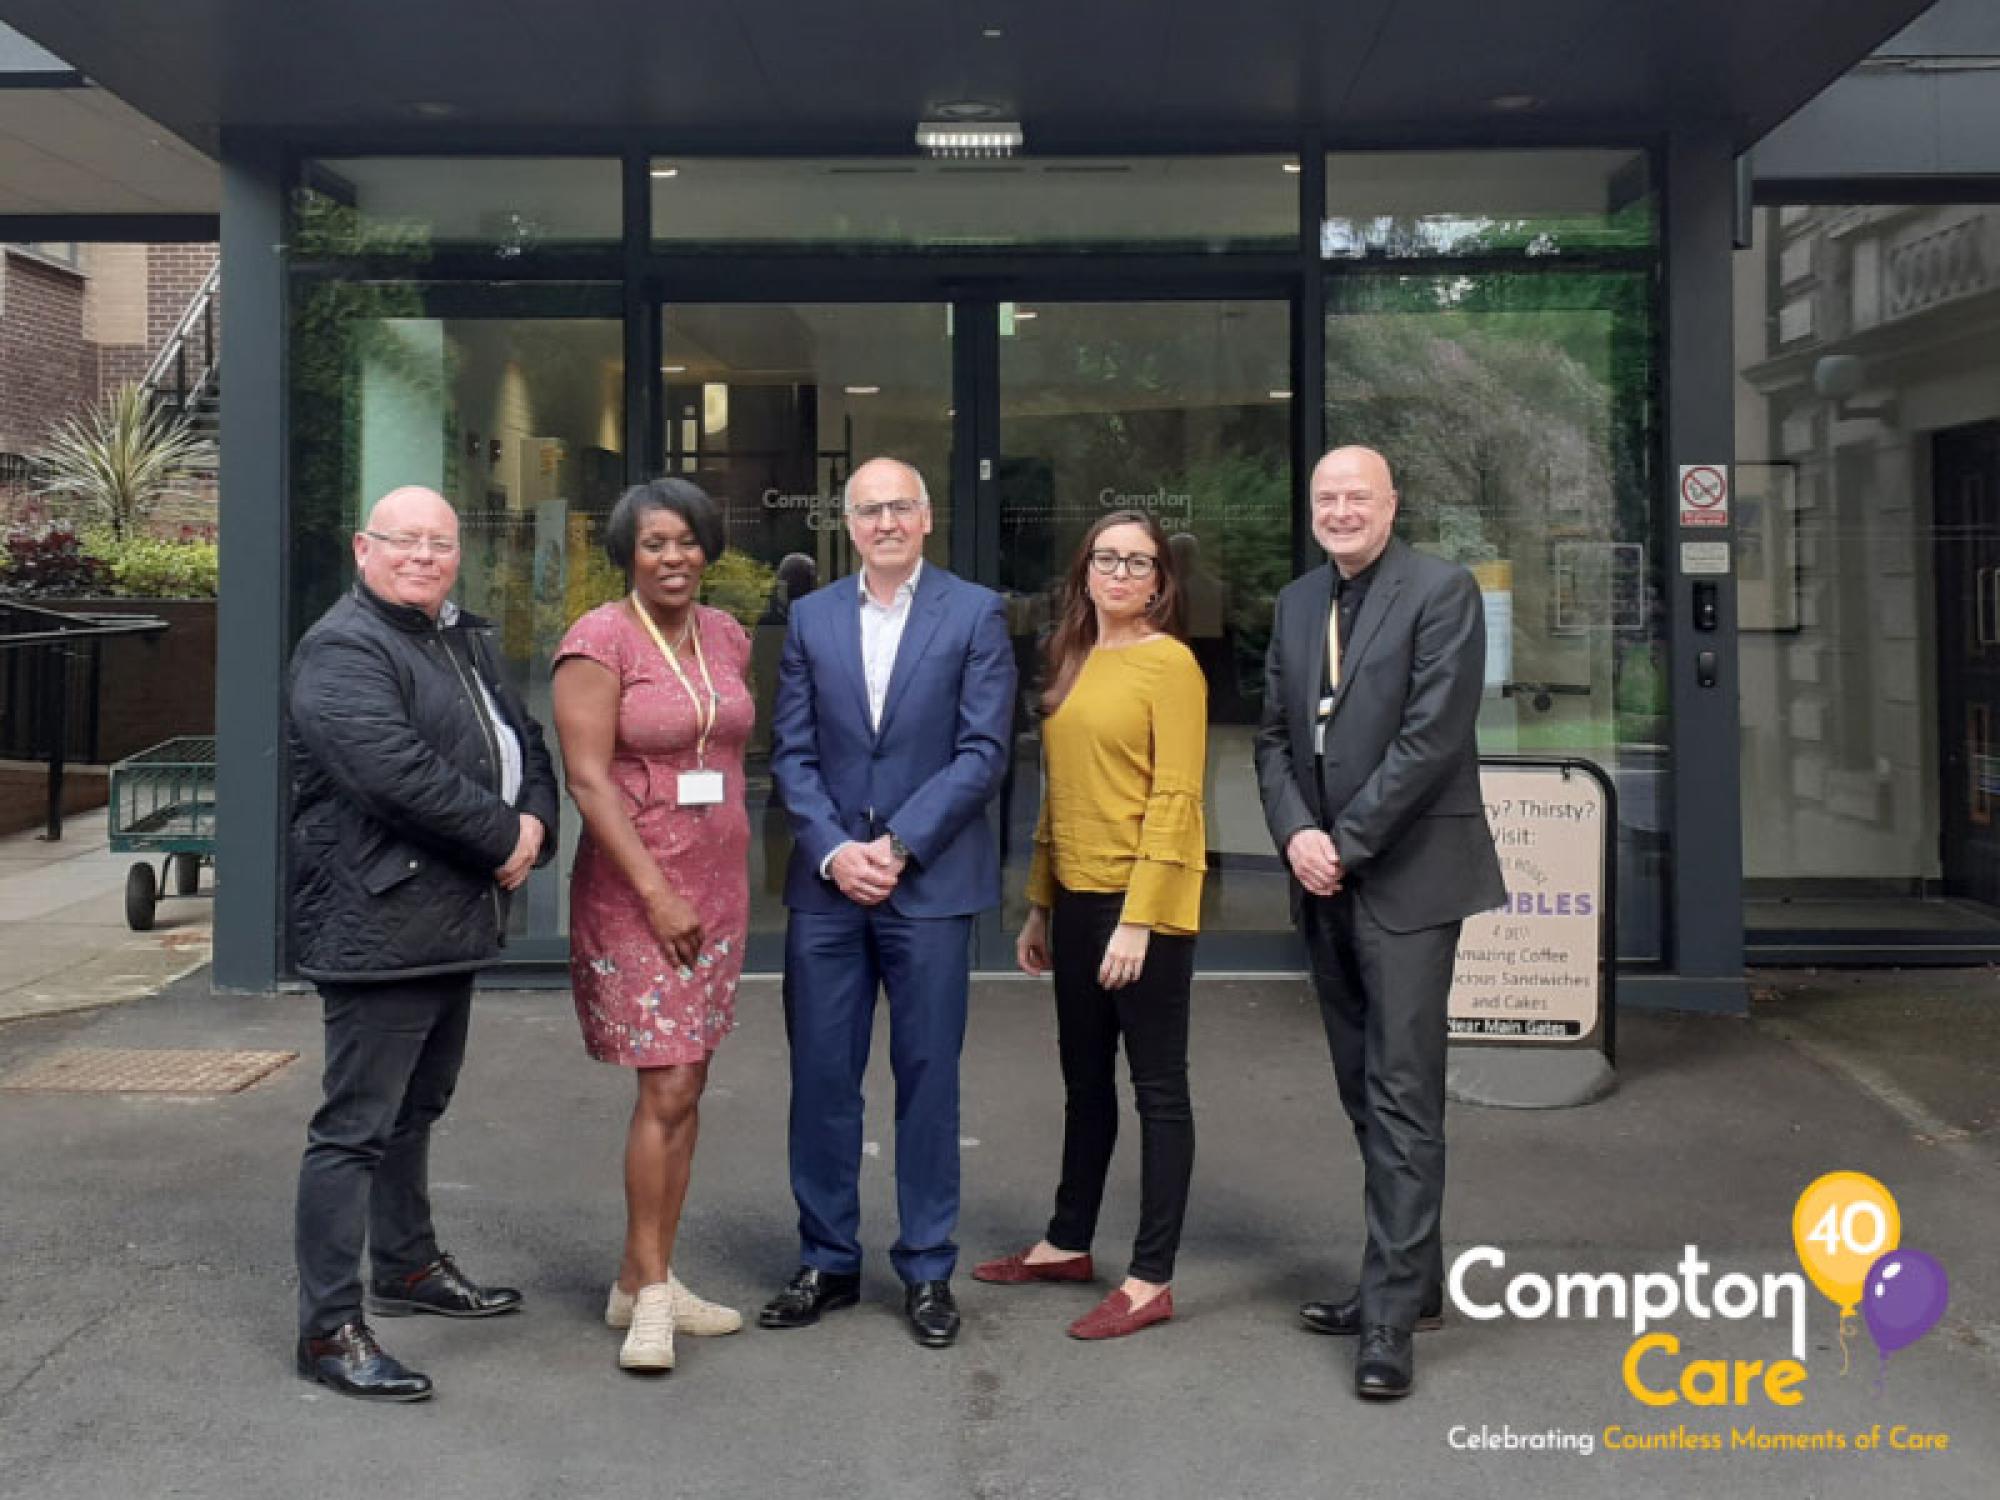 Compton Care has been an important part of the community for 40 years, supporting thousands of local families affected by incurable illnesses.